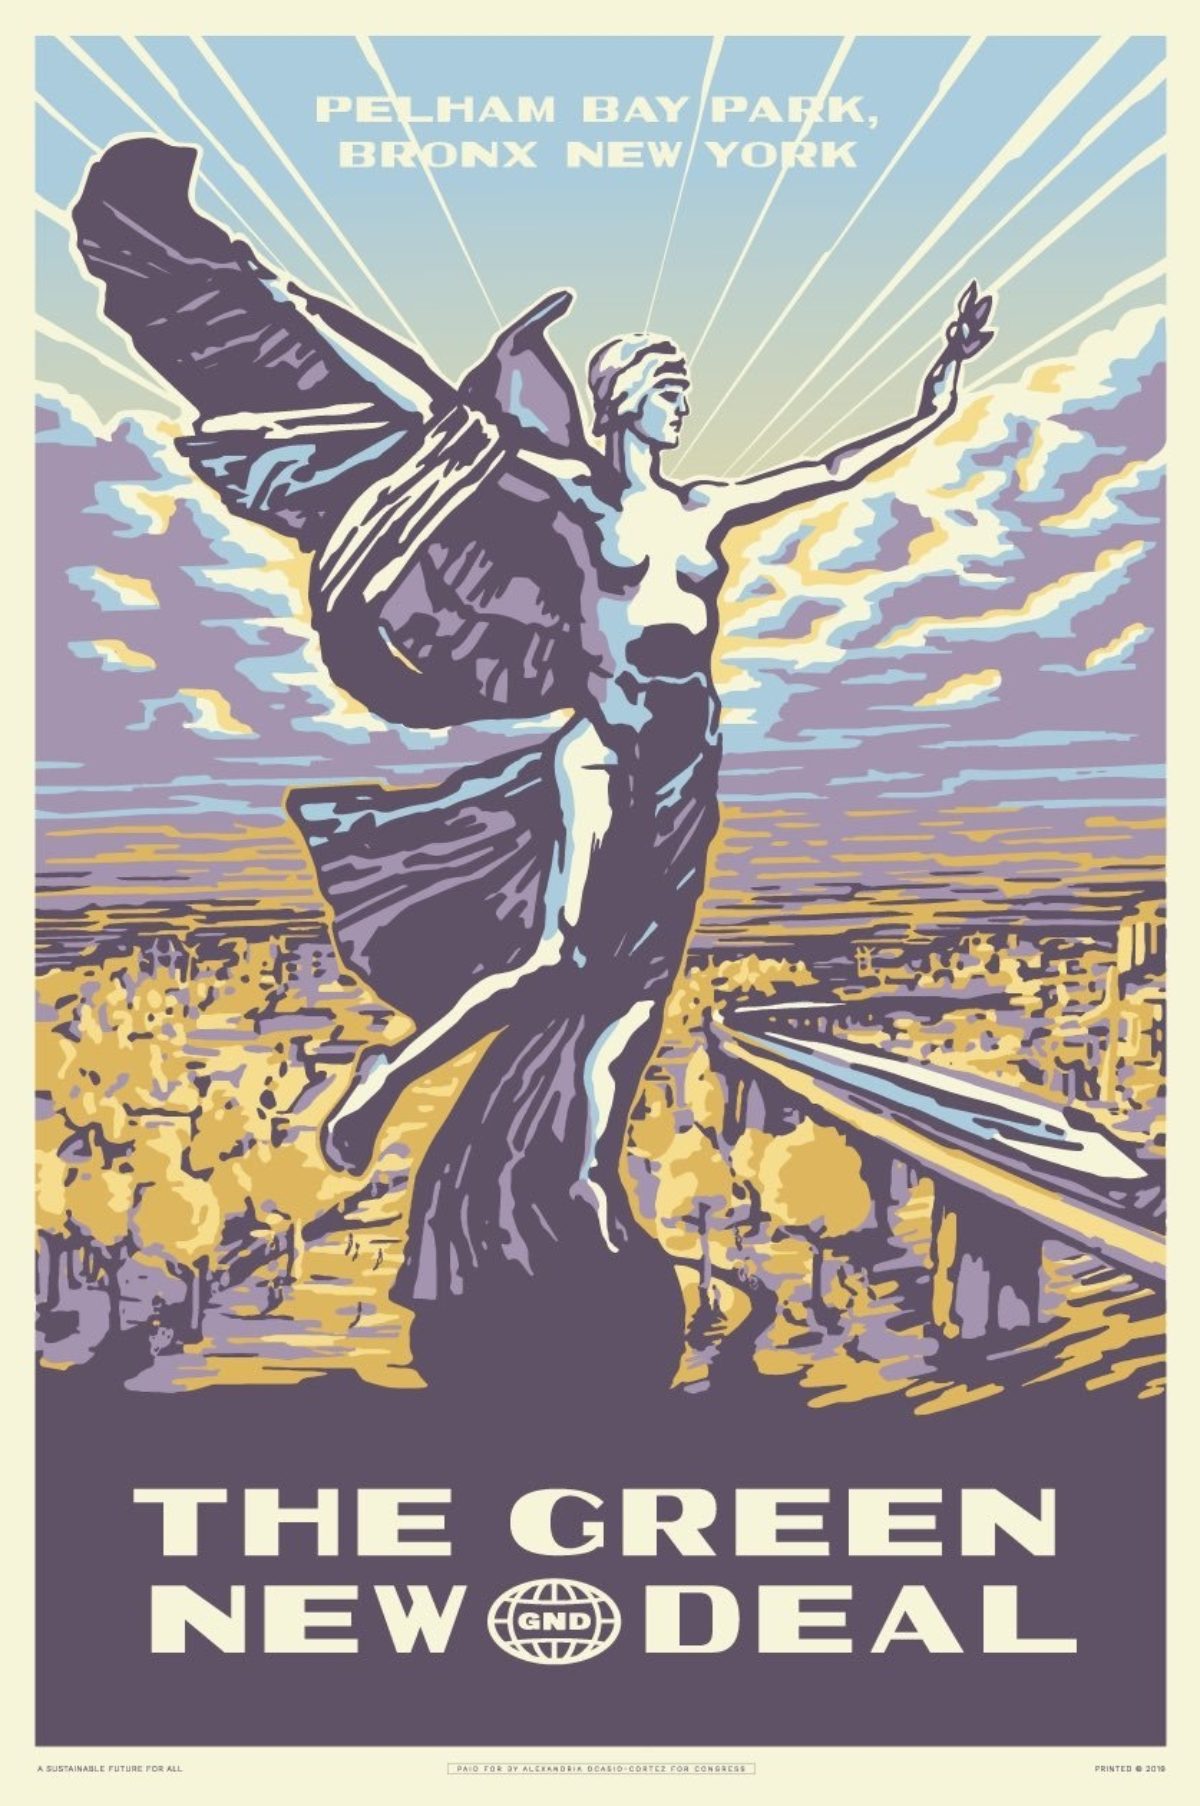 An illustrative poster of a statue of a person with arms out as rays of light and clouds surround it.